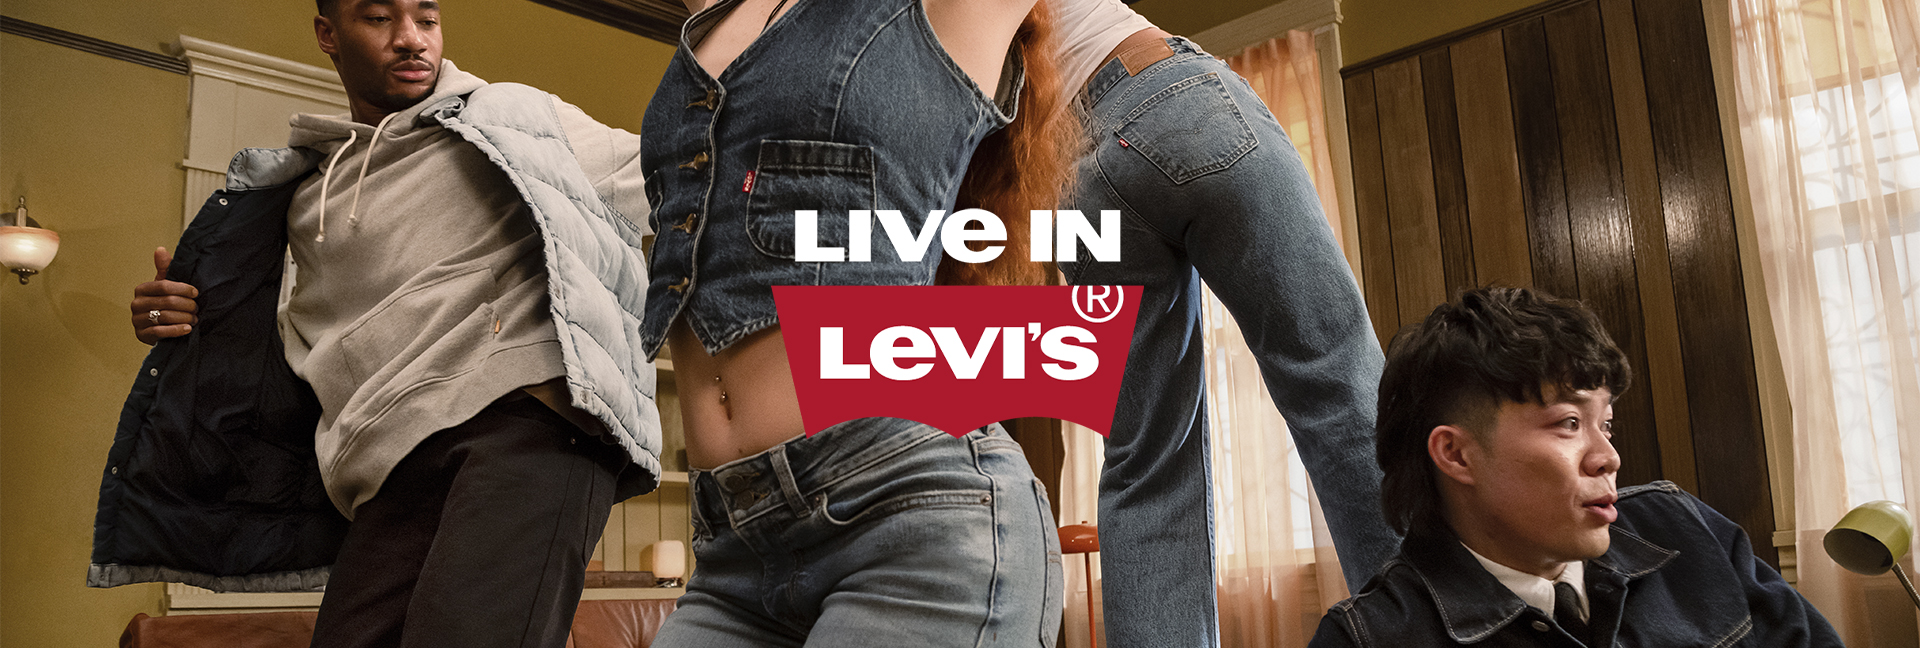 Live in Levis